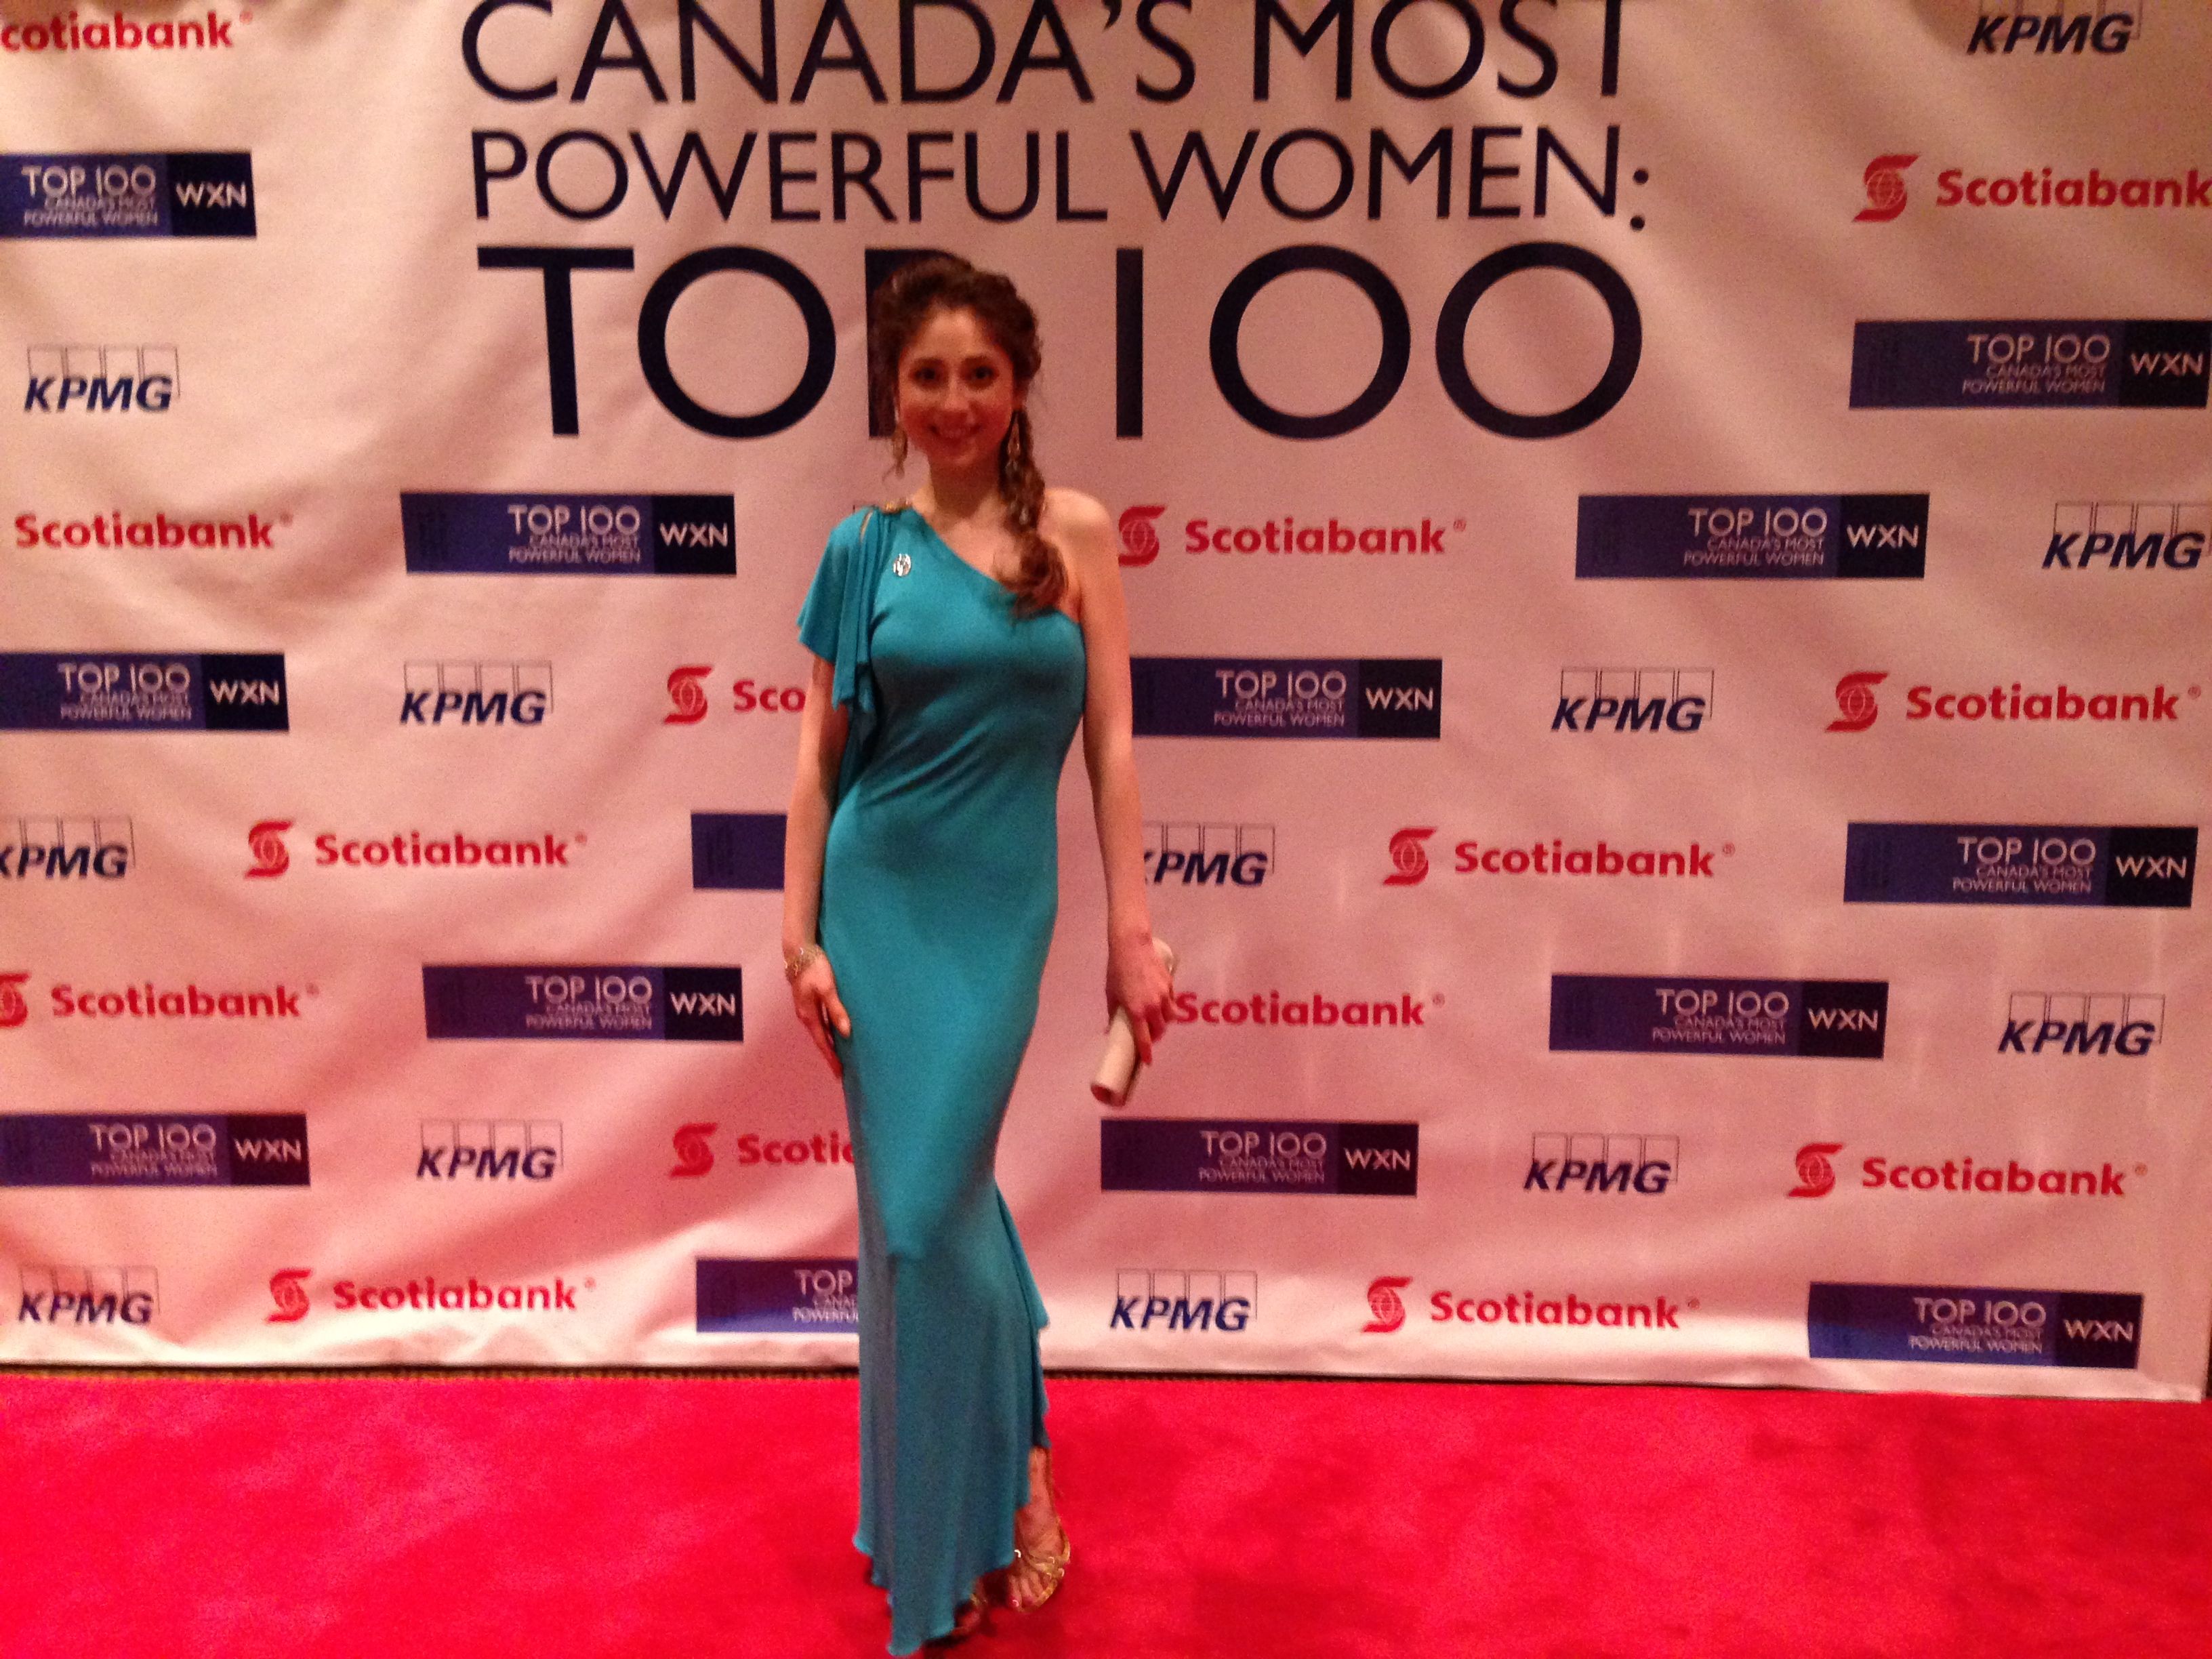 Kelly is the youngest 2013 Canada's Most Powerful Women: Top 100 recipient